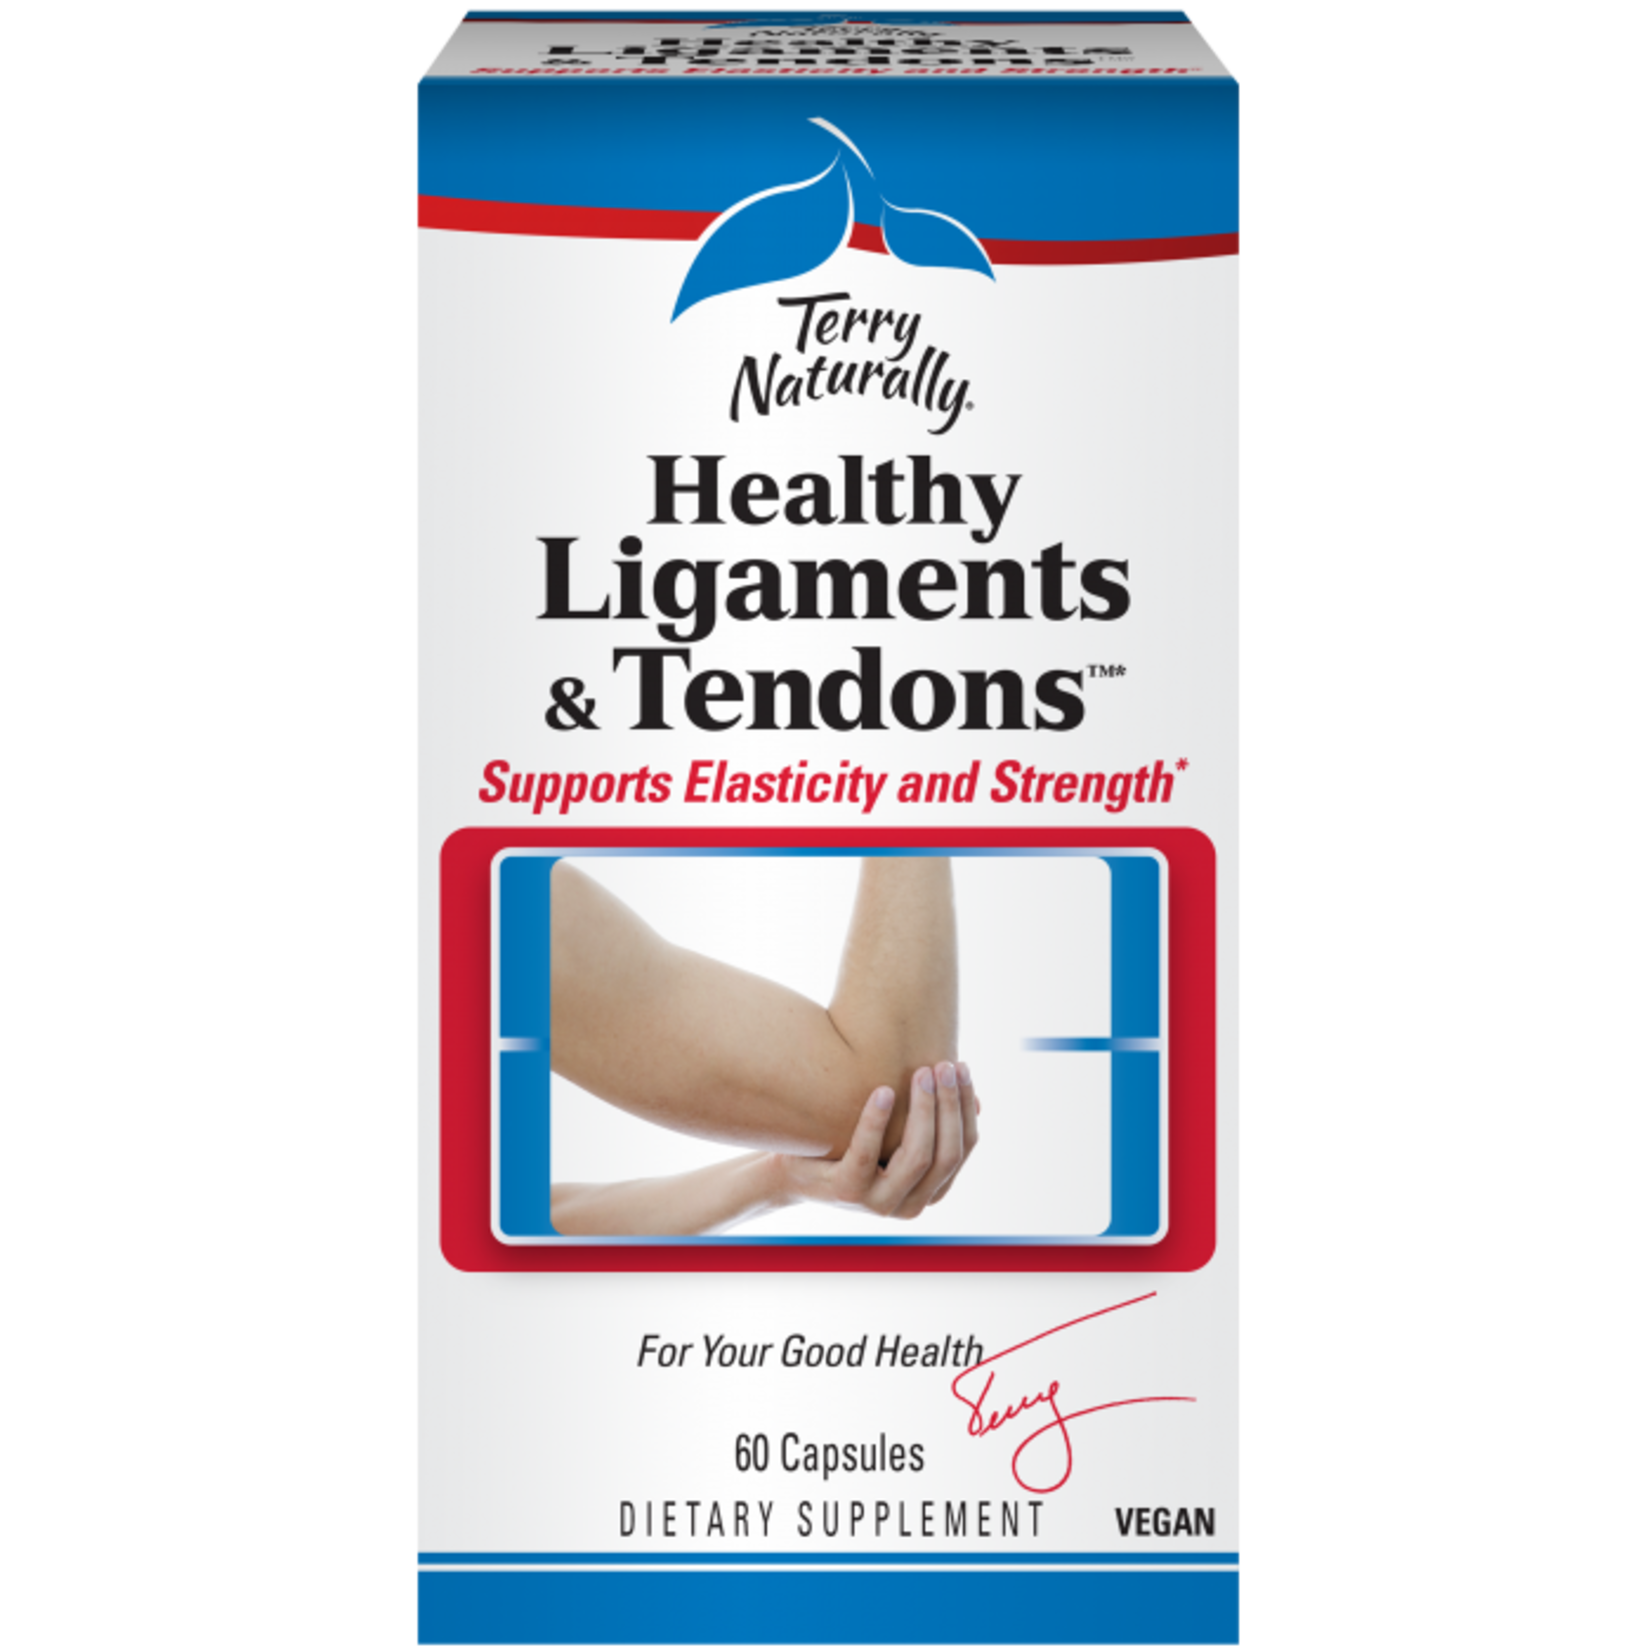 Terry Naturally Terry Naturally - Healthy Ligaments & Tendons - 60 Capsules